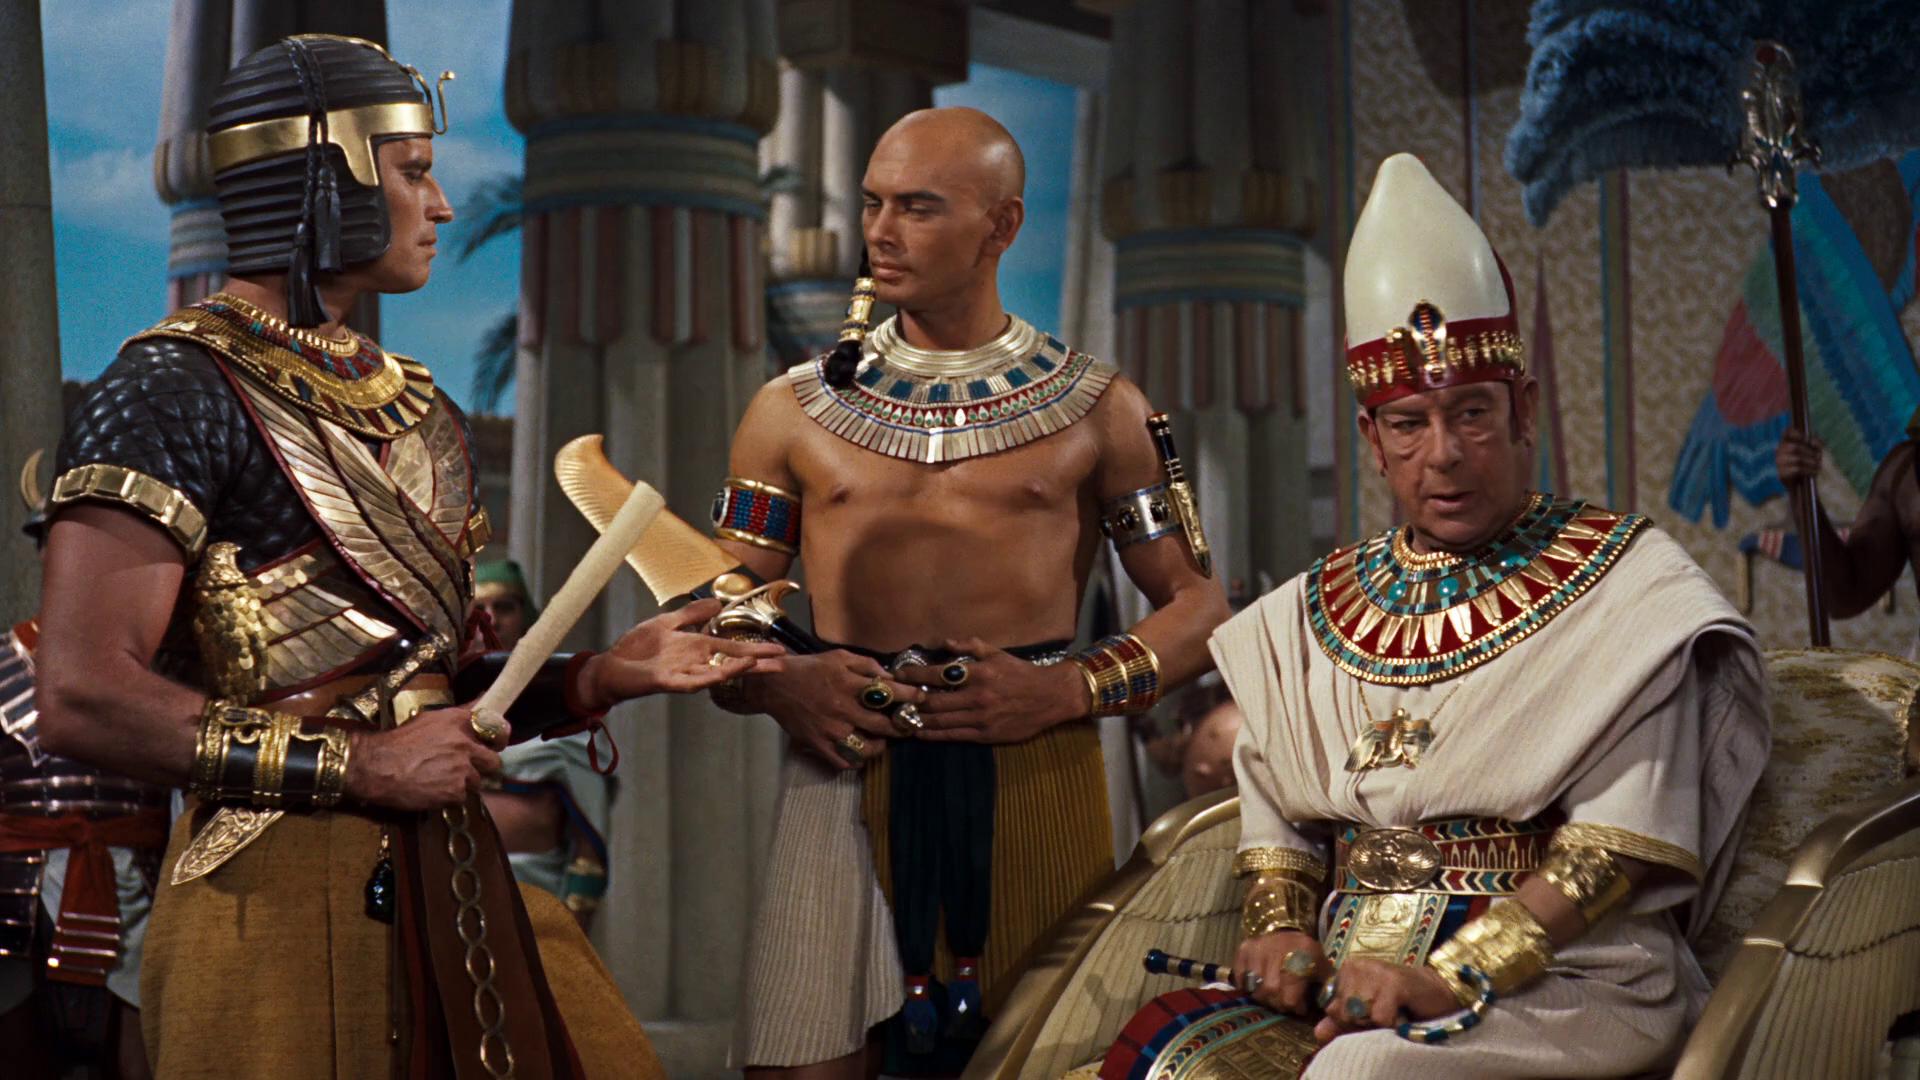 Moviery.com - Download the Movie The Ten Commandments Online in HD, DVD